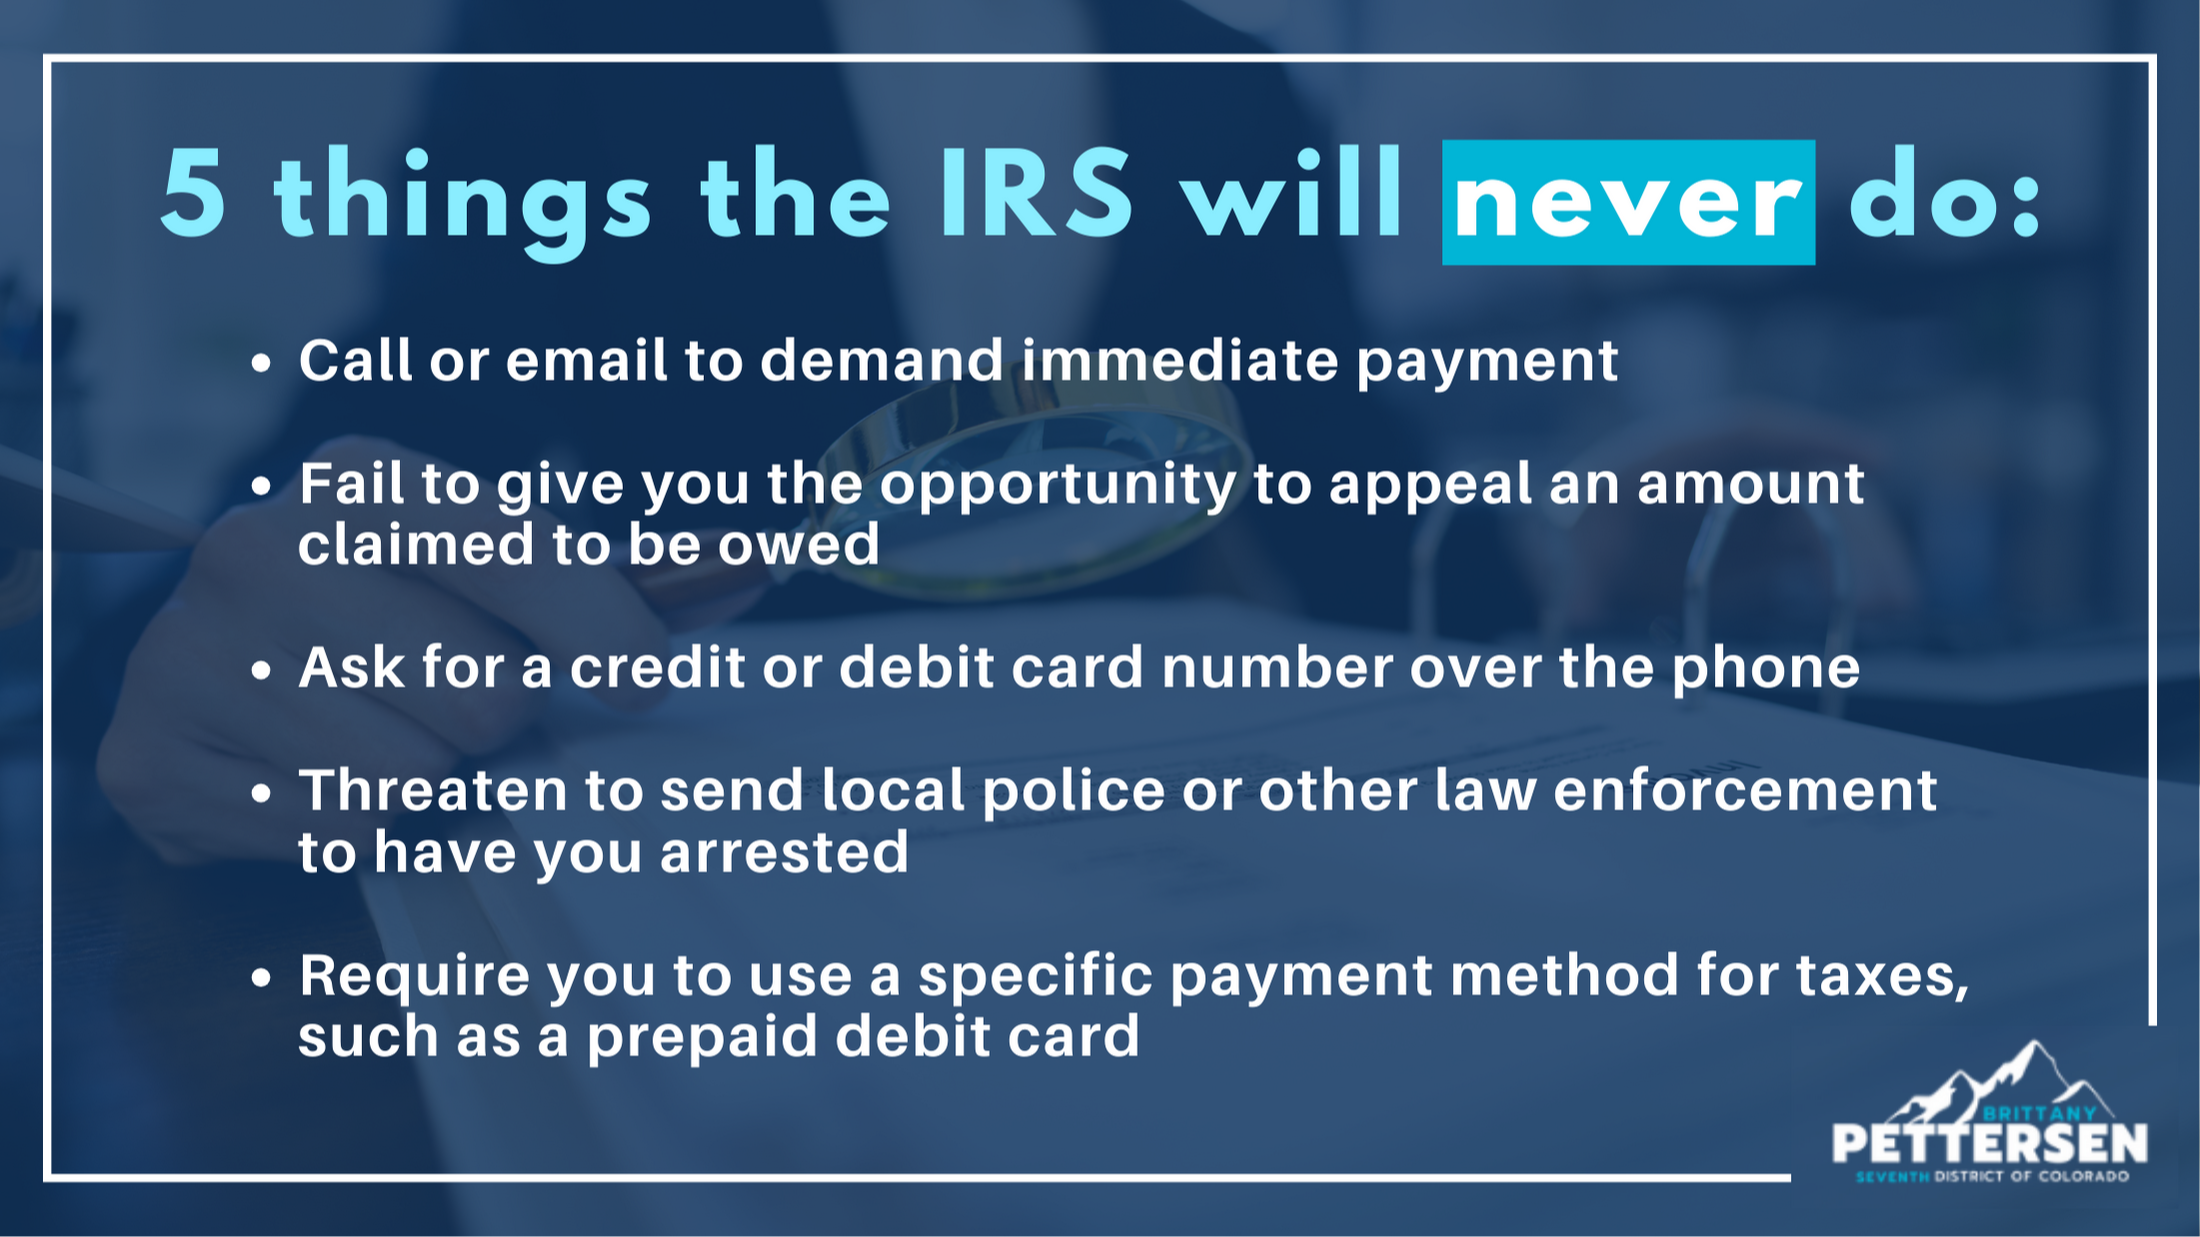 5 things the IRS will never do